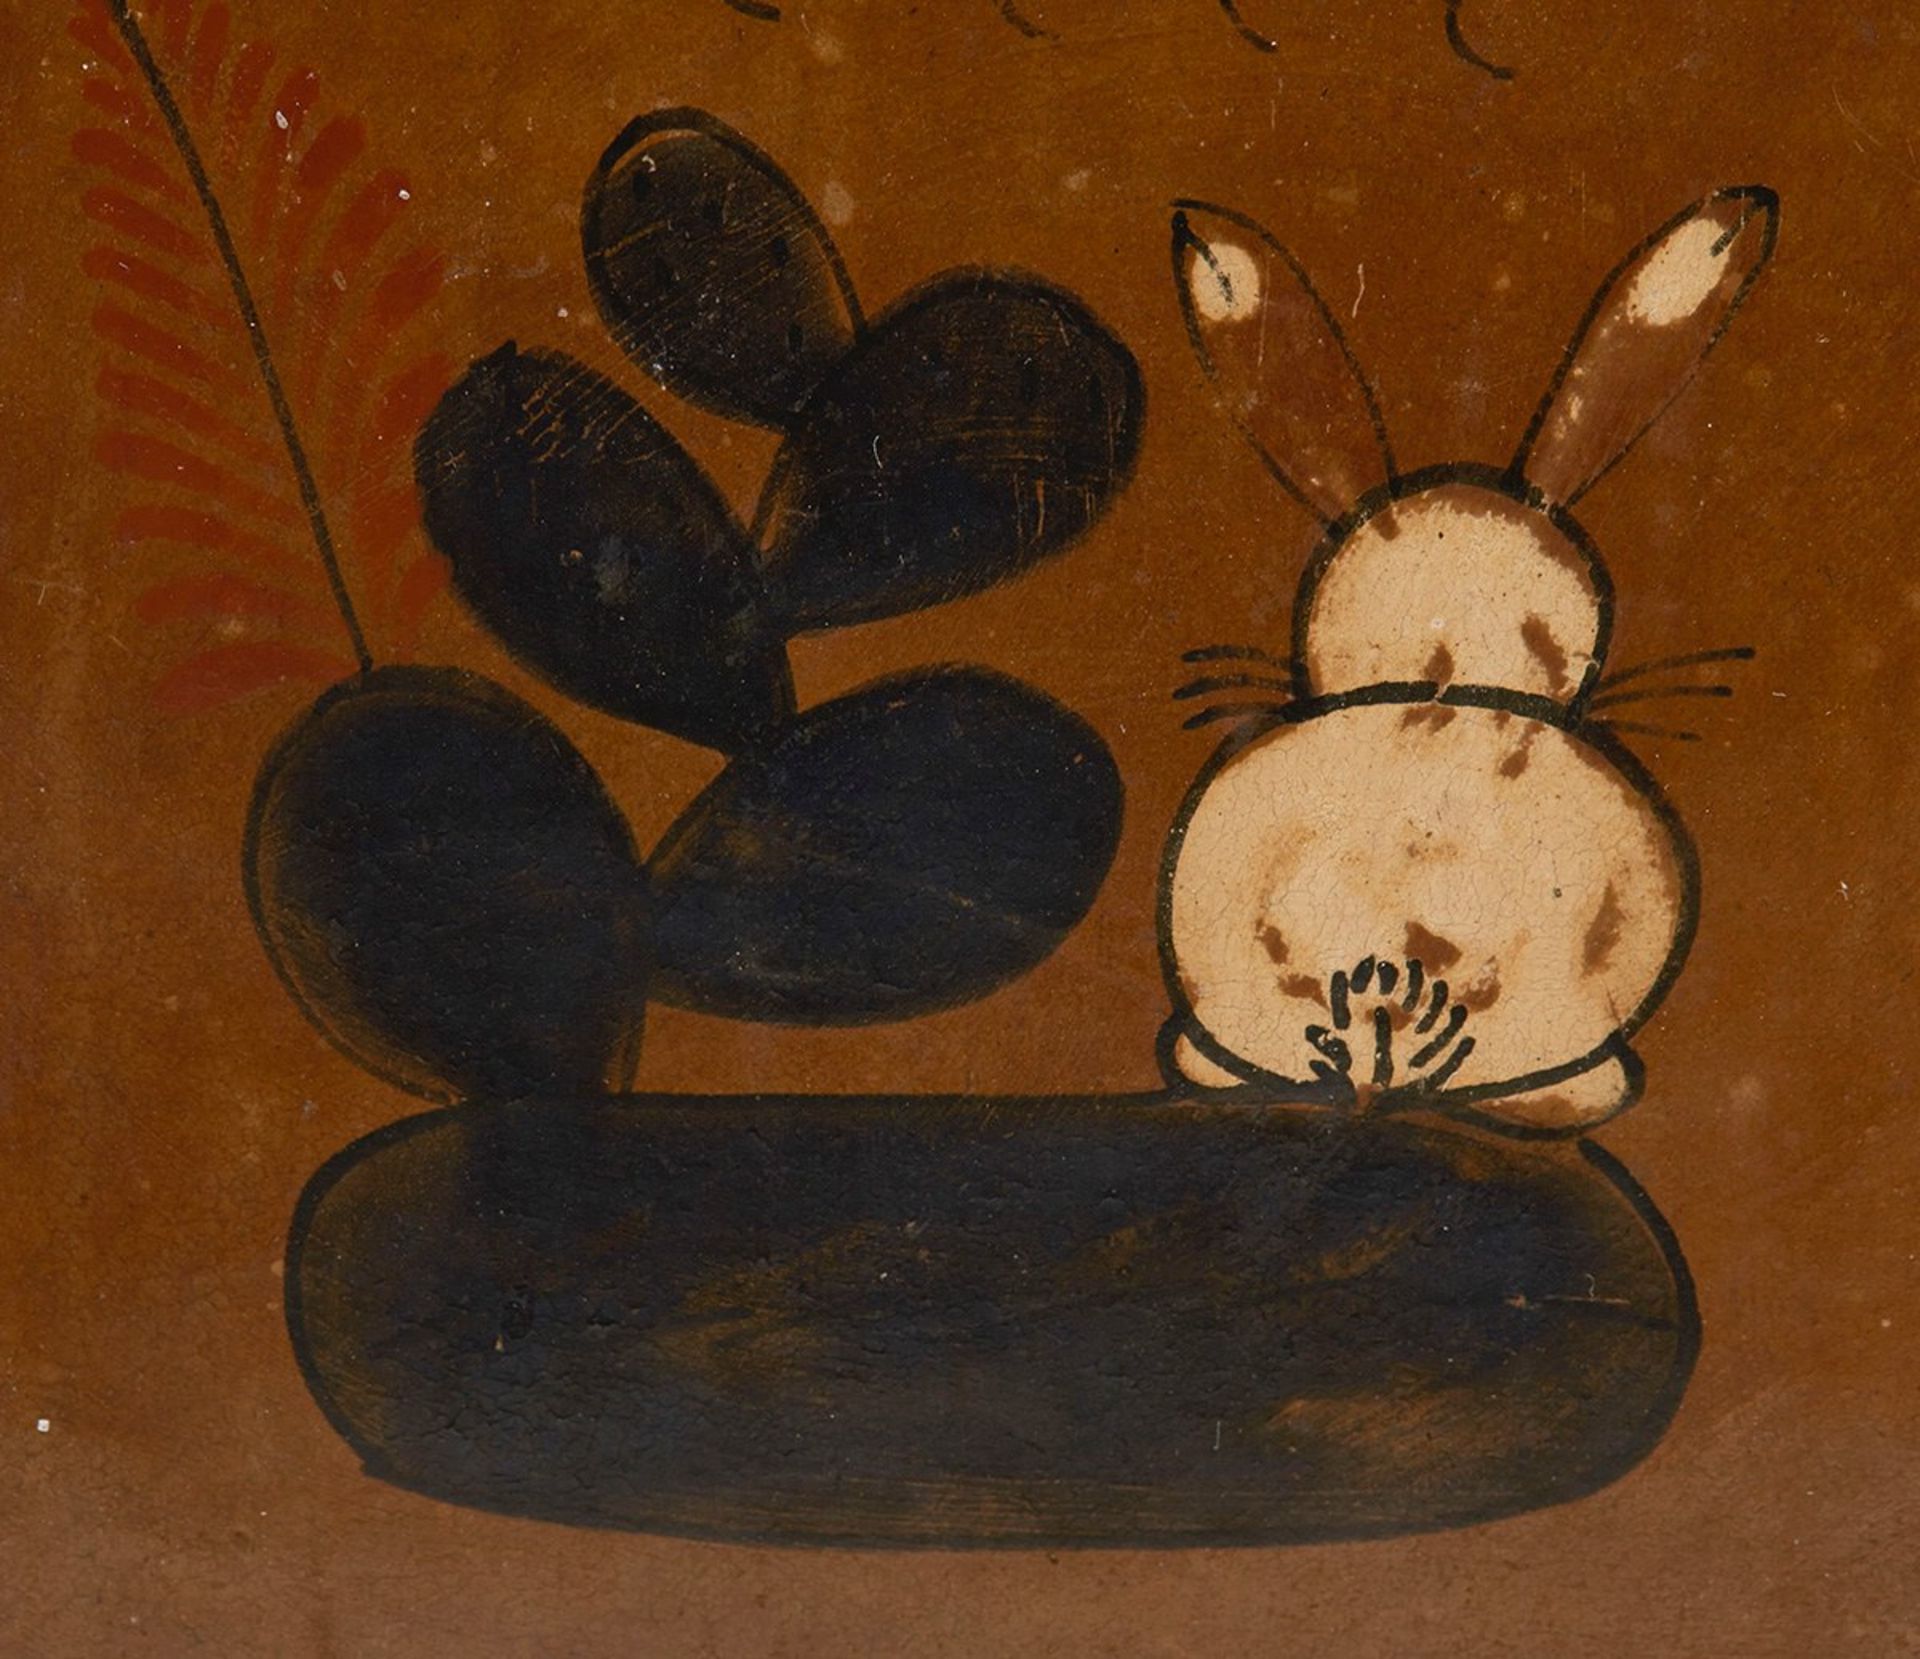 VINTAGE TILE WITH NAIVE RABBIT DESIGN 20TH C. - Image 2 of 4